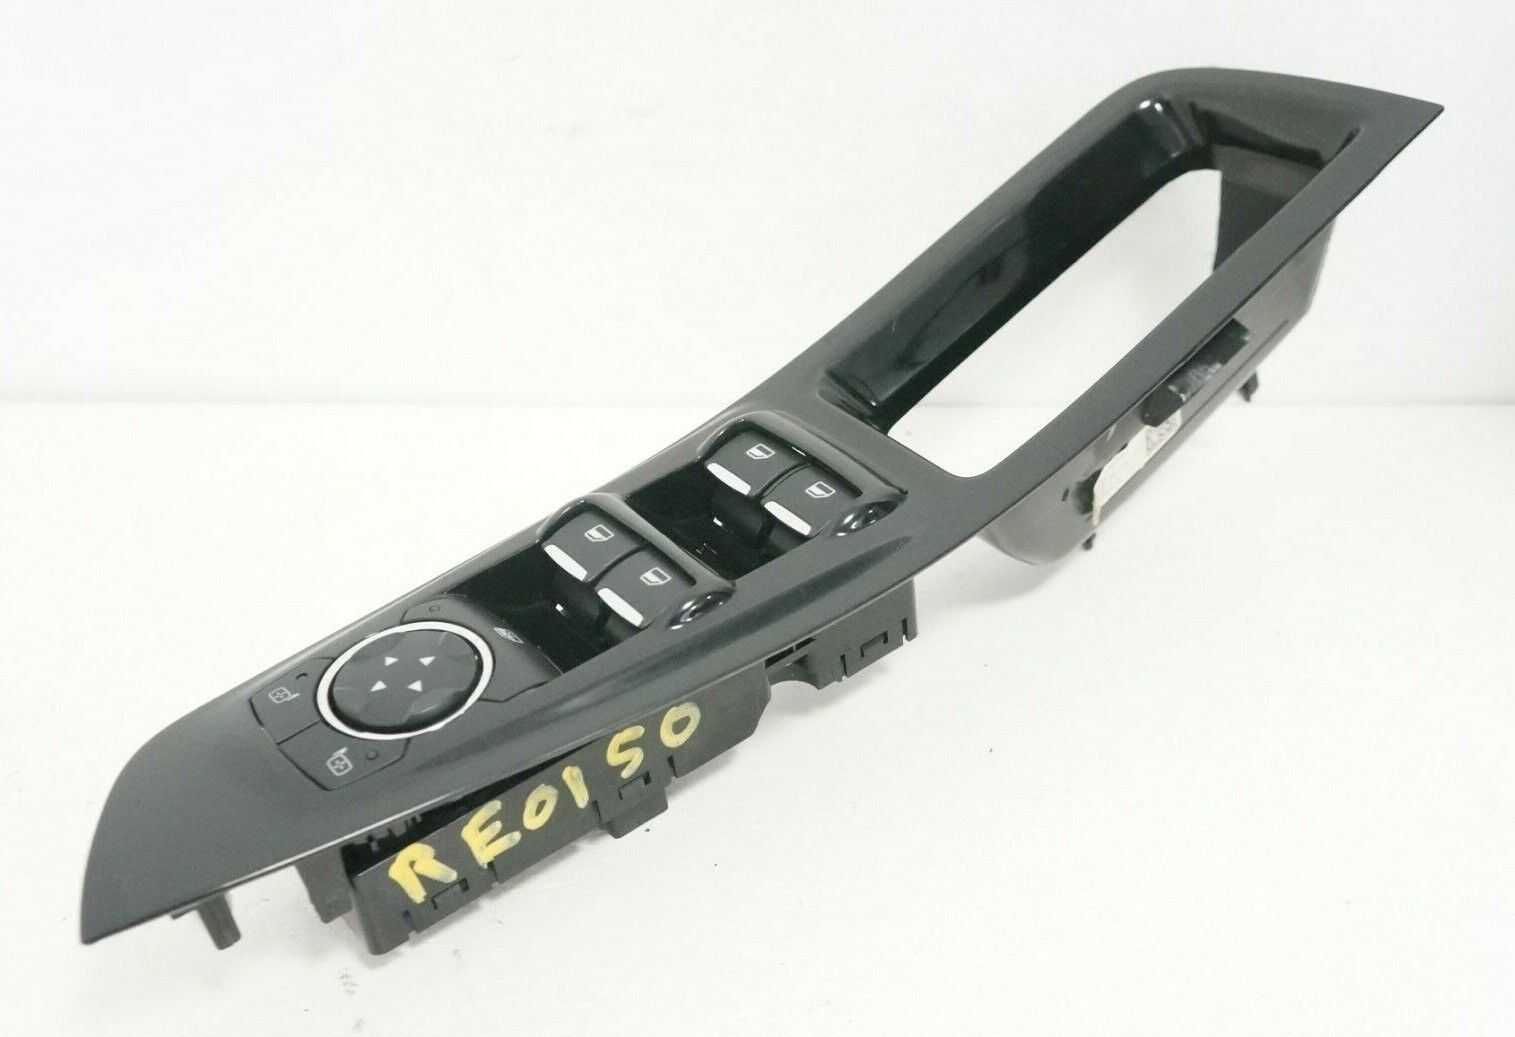 2015-2018 Ford Edge LH Door Window Mirror Control Switch OEM FT4B 14A564 Alshned Auto Parts